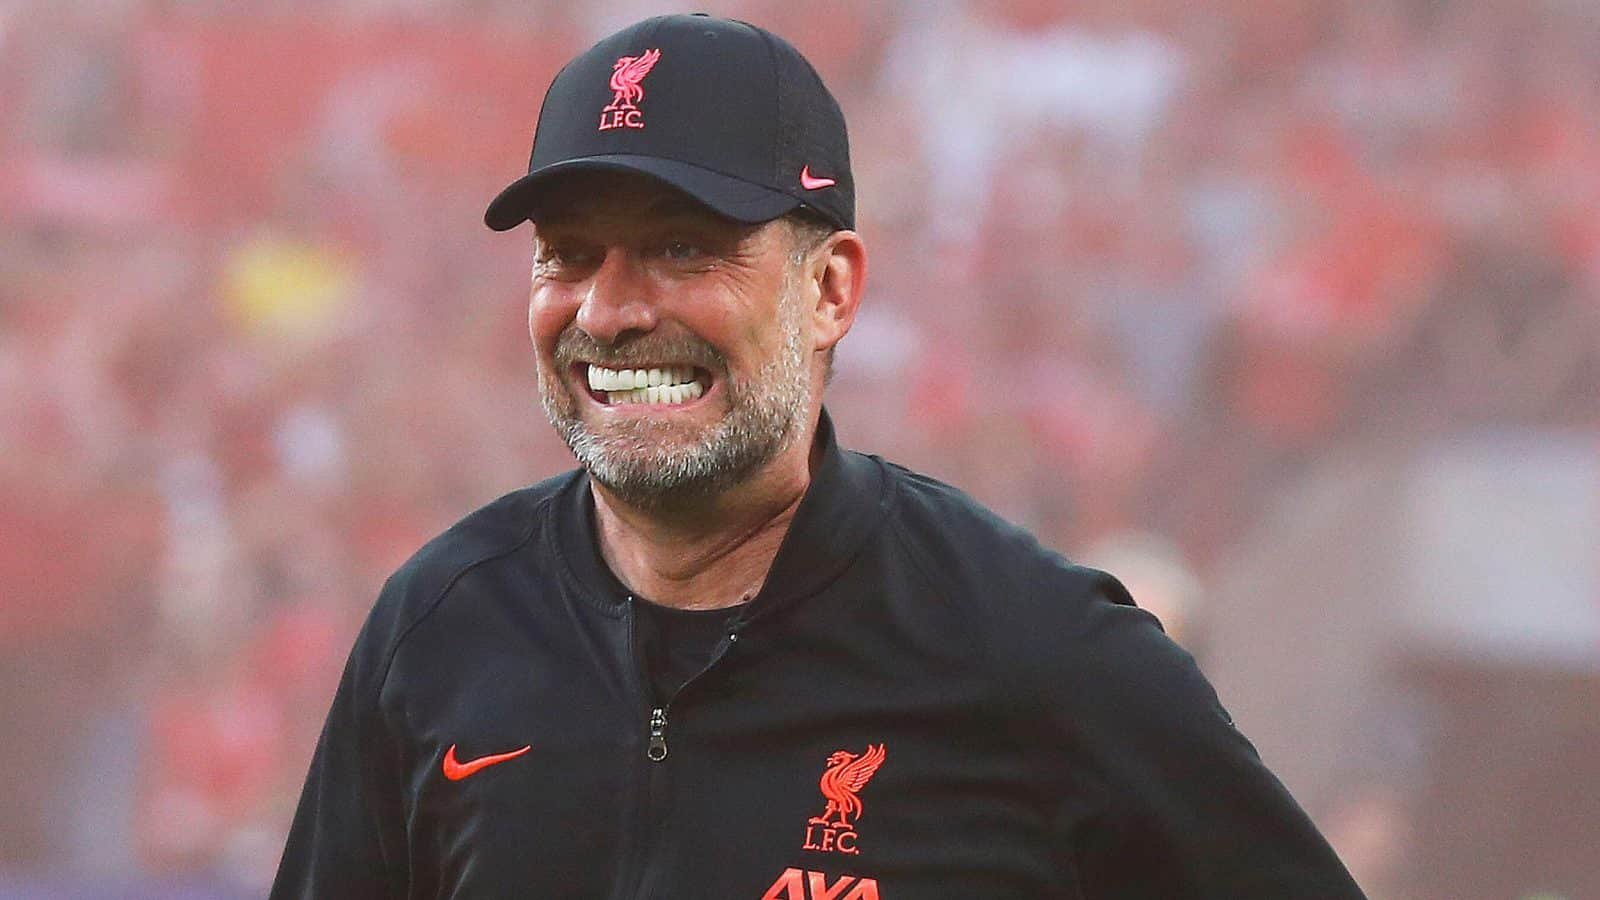 What will happen to Jurgen Klopp after Liverpool sale revealed